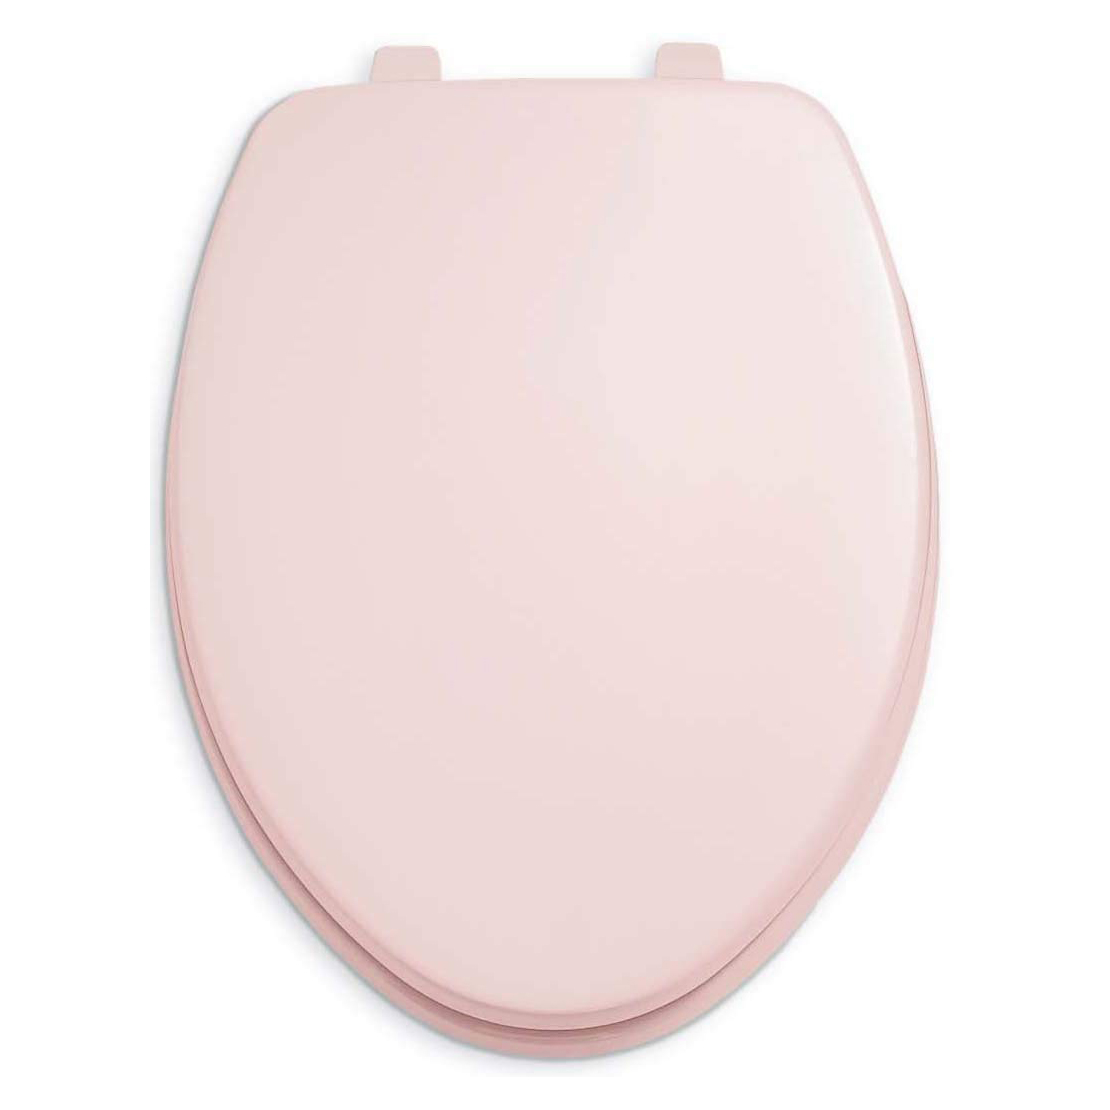 Laurel Elongated Toilet Seat w/Cover in Shell